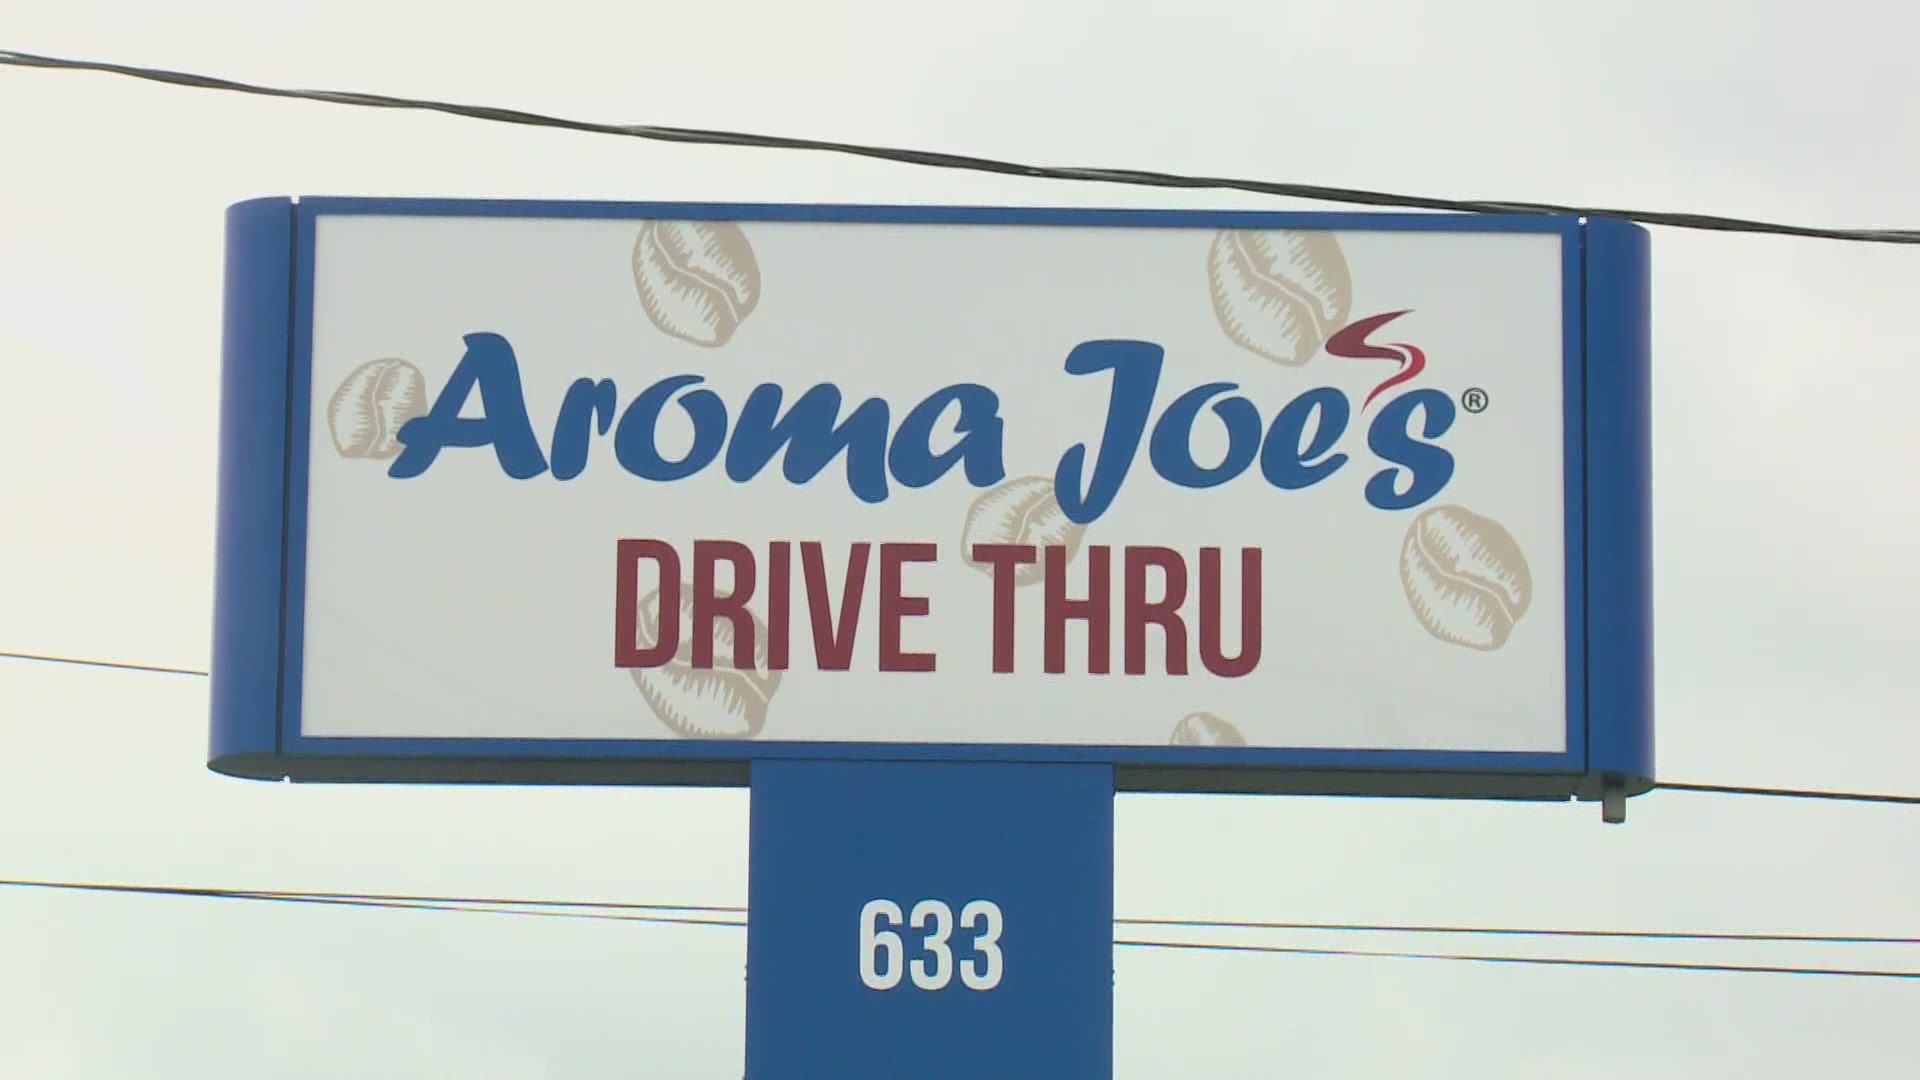 If you're a soon to be high school or college graduate, head to Aroma Joe's and get your free coffee